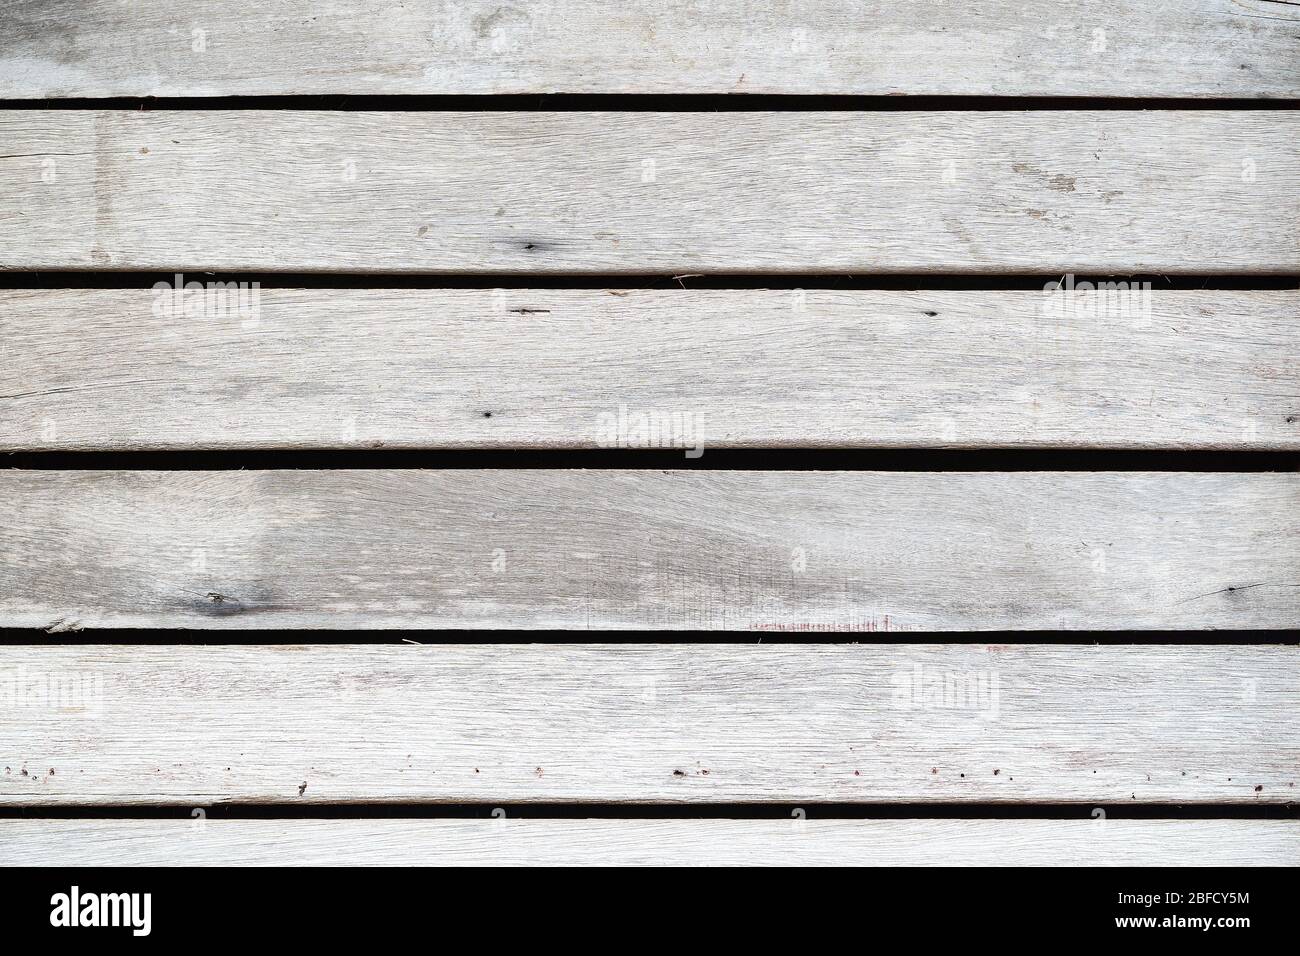 Old white wood texture background, wide wooden plank panel pattern, vintage style. Stock Photo